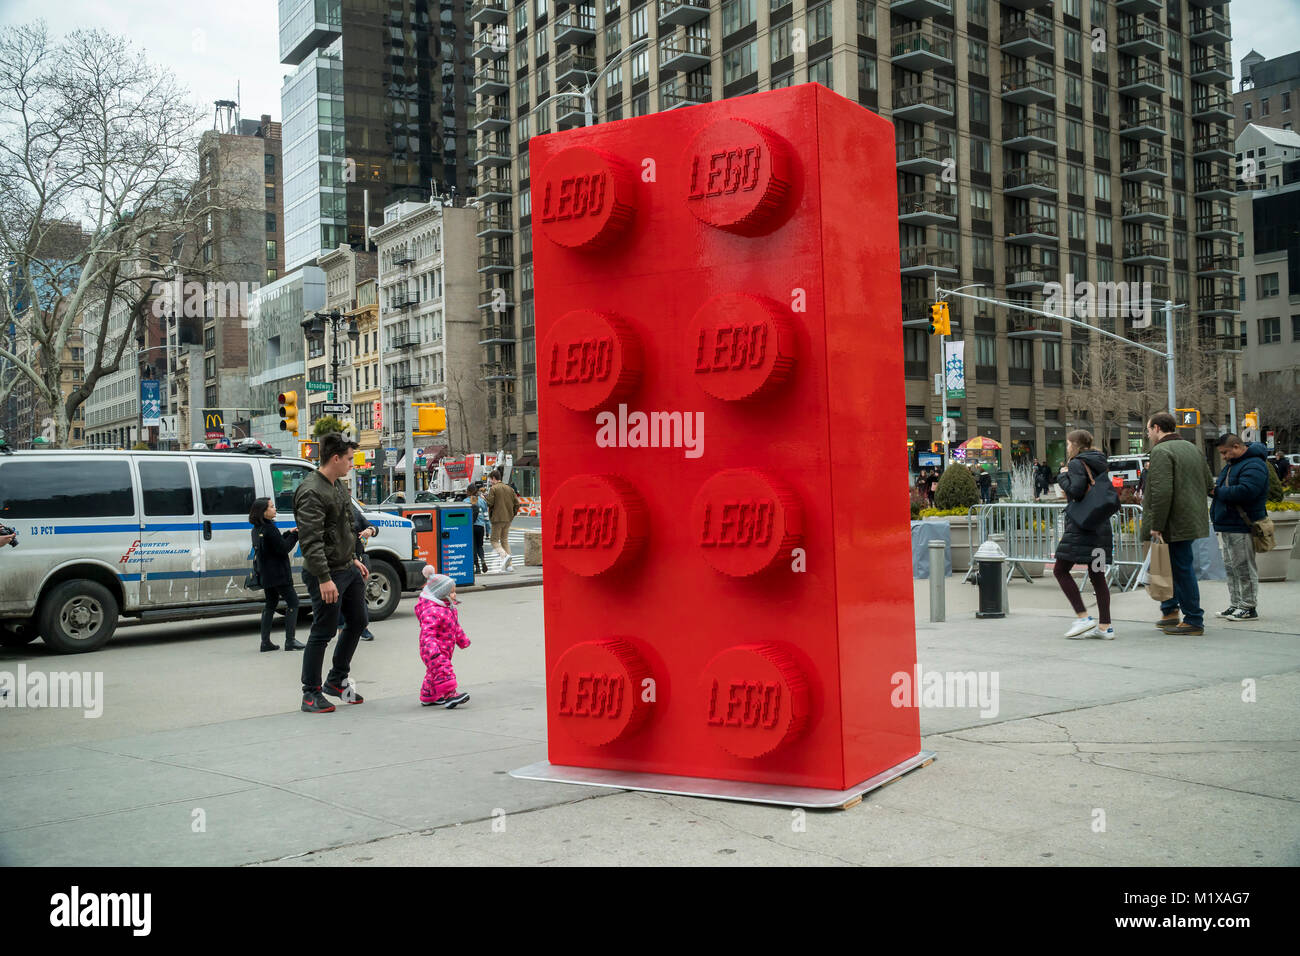 Reminiscent of the monolith in '2001: A Space Odyssey', a ten-foot tall LEGO is placed in Flatiron Plaza in New York, seen on Saturday, January 27, 2018. The huge brick celebrates the 60th anniversary of Lego, conveniently right opposite the LEGO store, and consists of over 133,000 LEGO bricks, weighing in at over 1200 pounds and taking 350 hours to construct. The 60th anniversary LEGO sets are on sale now. (© Richard B. Levine) Stock Photo